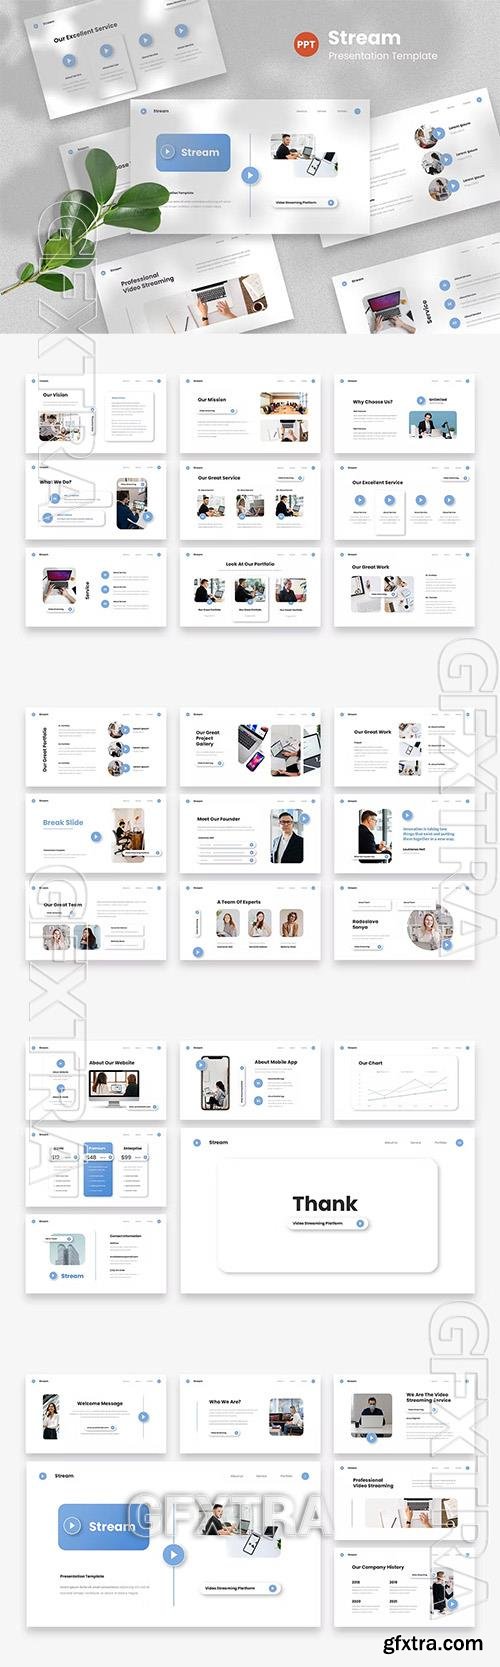 Stream - Video Streaming PowerPoint Template RP4FH6Y